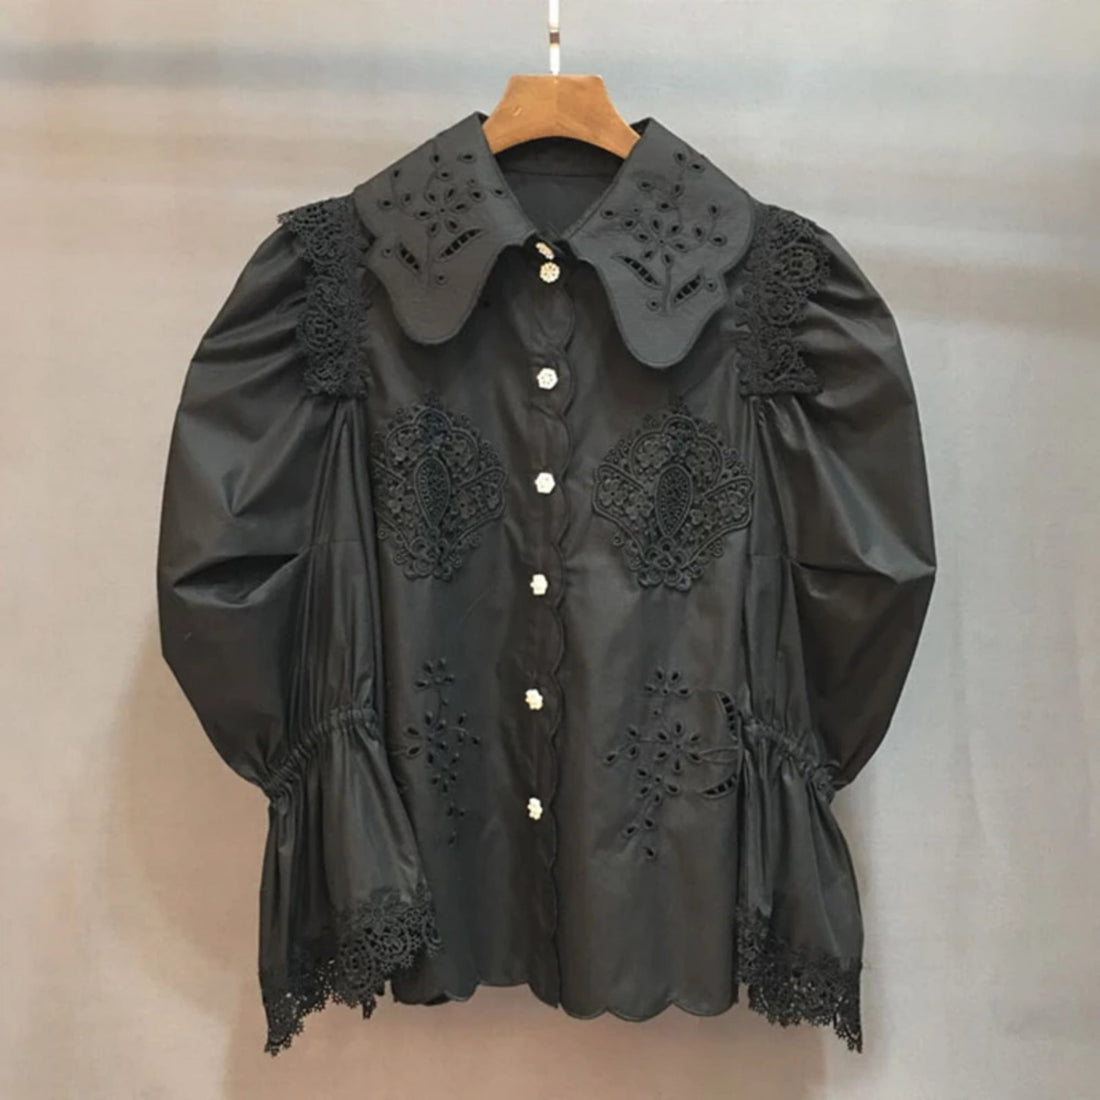 Women's Polyester Lace Long-Sleeved Shirt With Ruffles